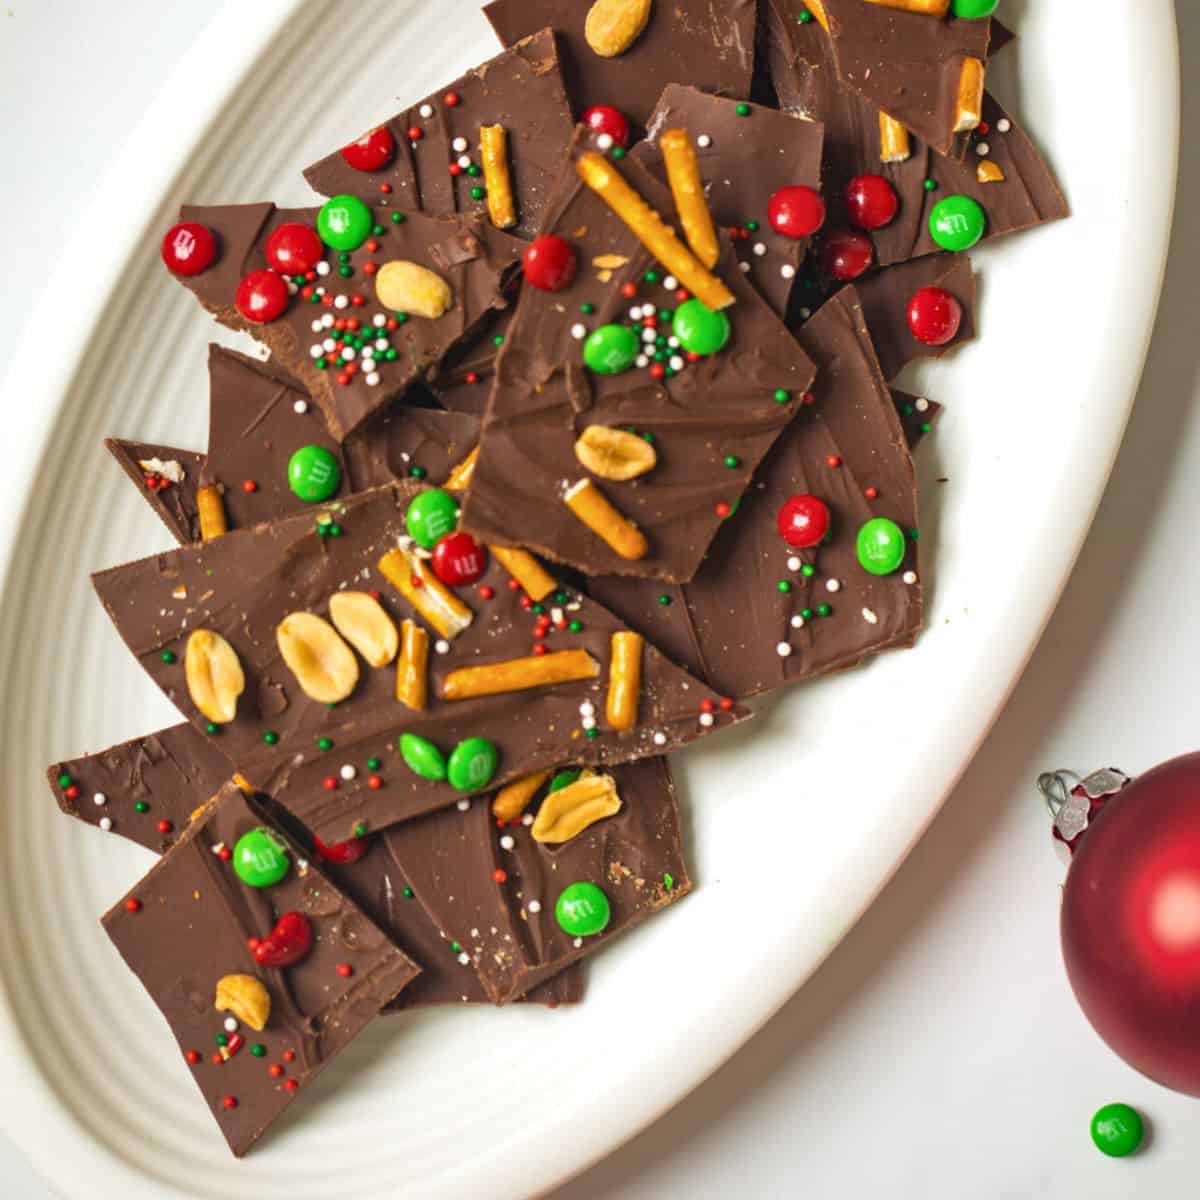 Plate of holiday chocolate bark topped with m&ms, pretzels, nuts, and sprinkles.